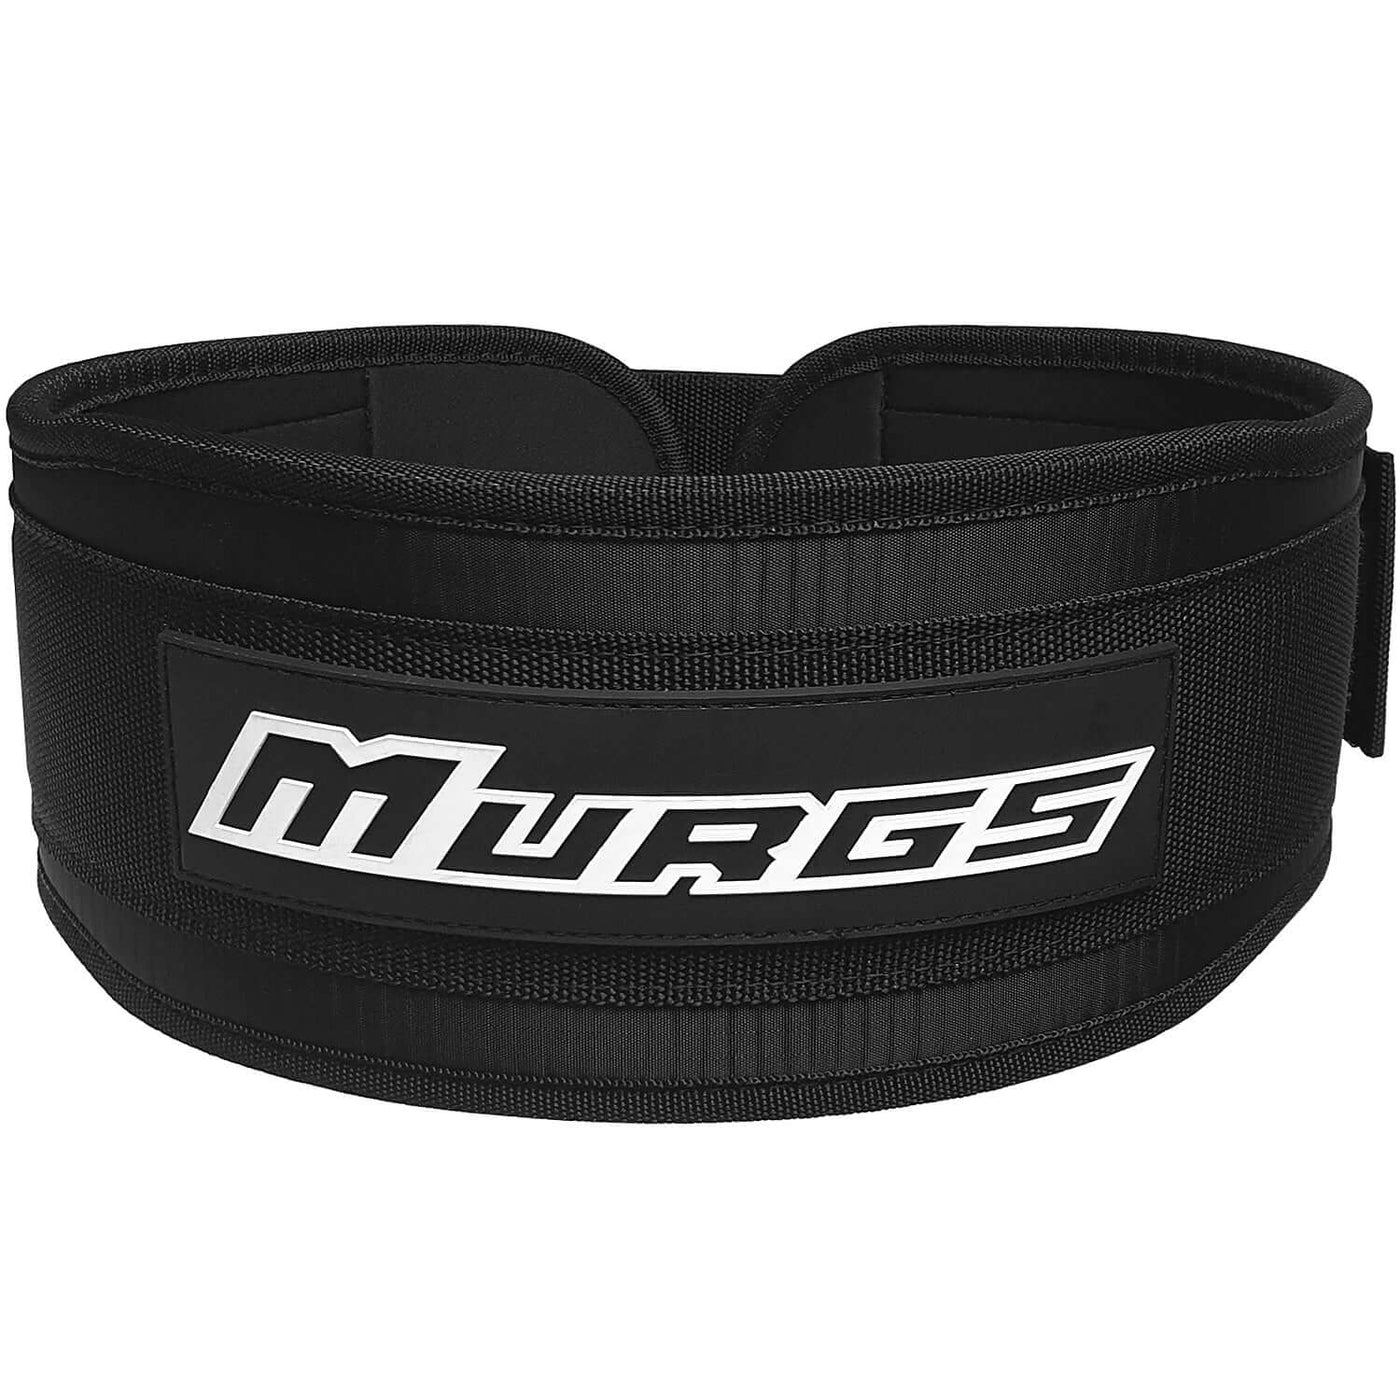 Murgs 5'' Weightlifting Belt for Crossfit and weightlifting